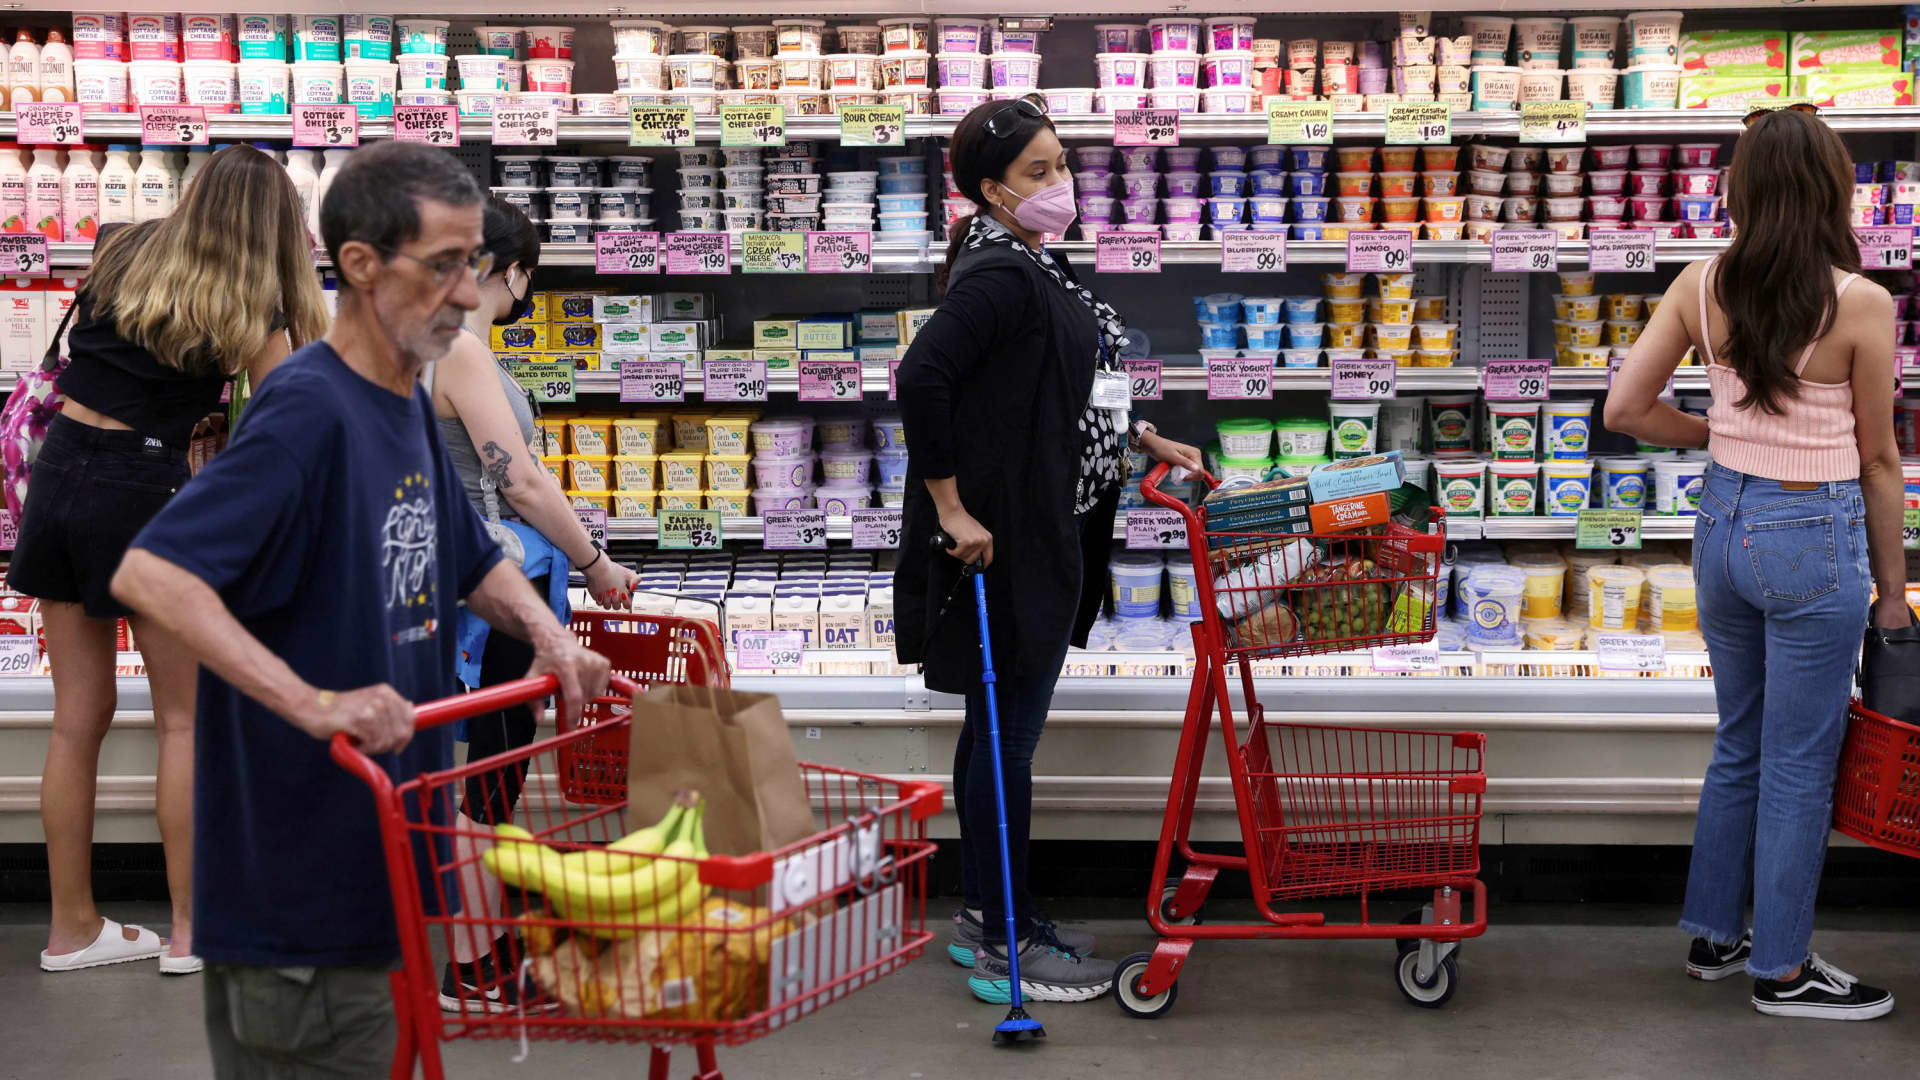 People shop in a supermarket as inflation affected consumer prices in New York City, June 10, 2022.